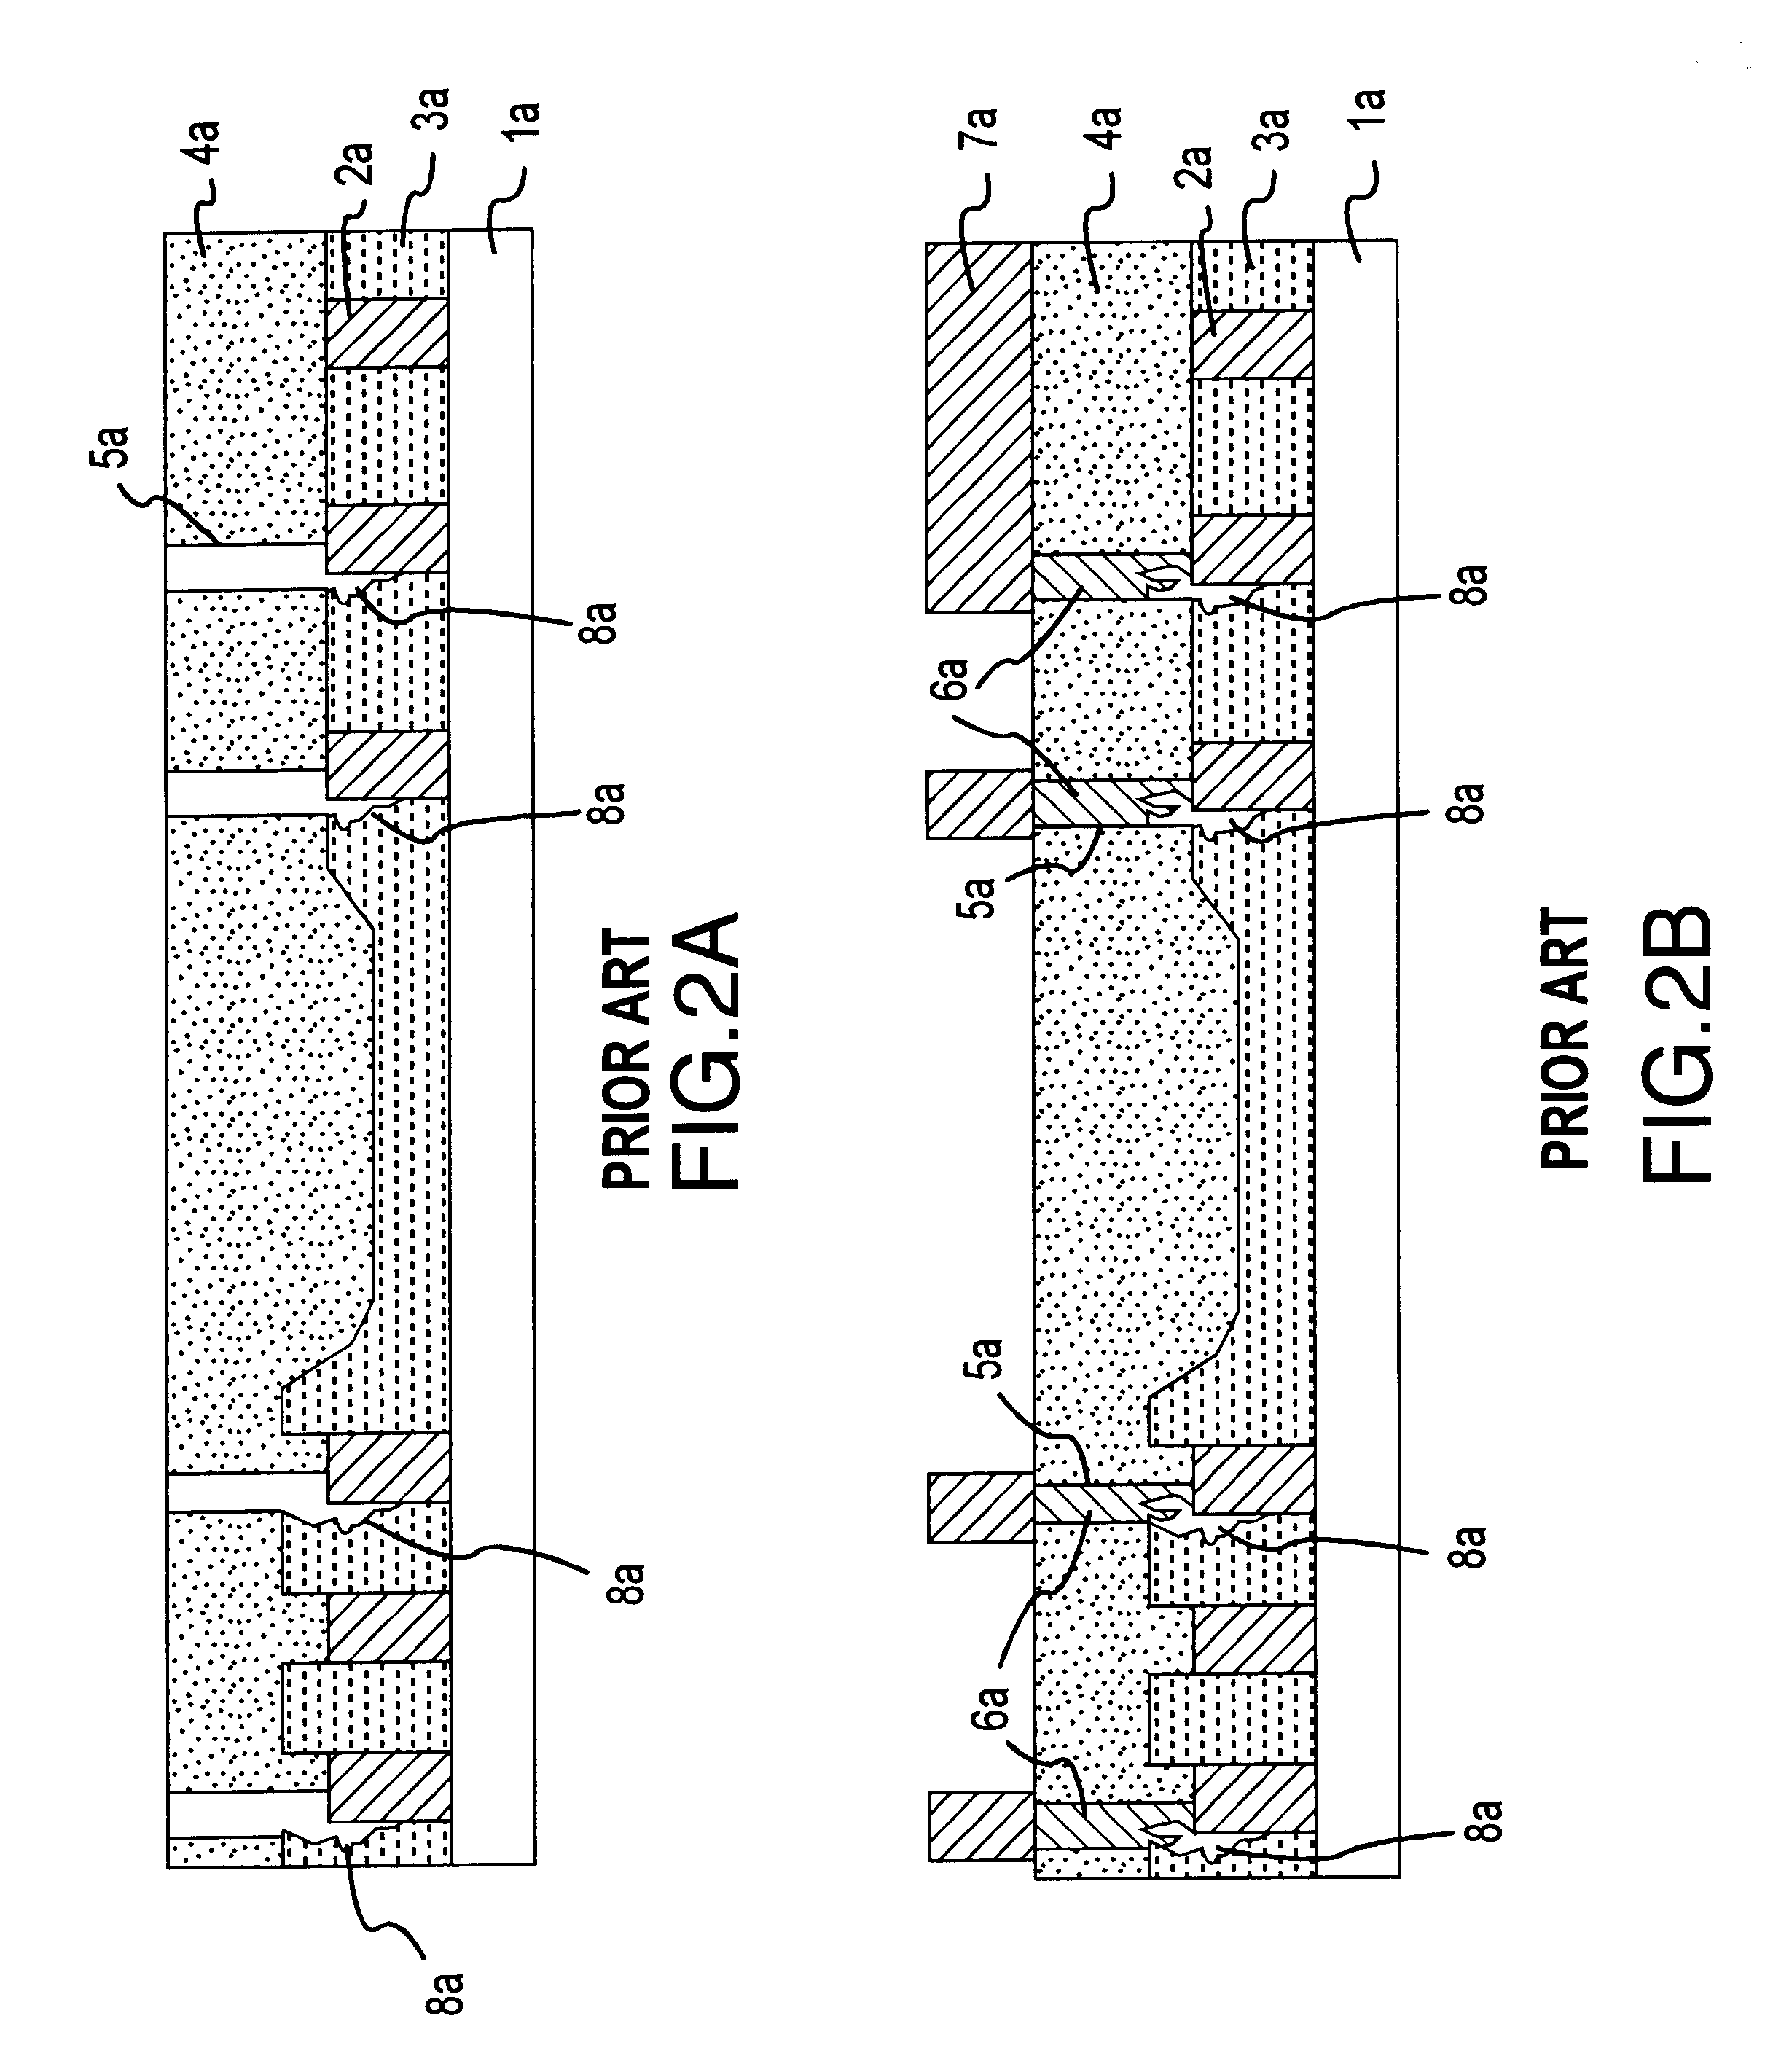 Interconnect with low dielectric constant insulators for semiconductor integrated circuit manufacturing